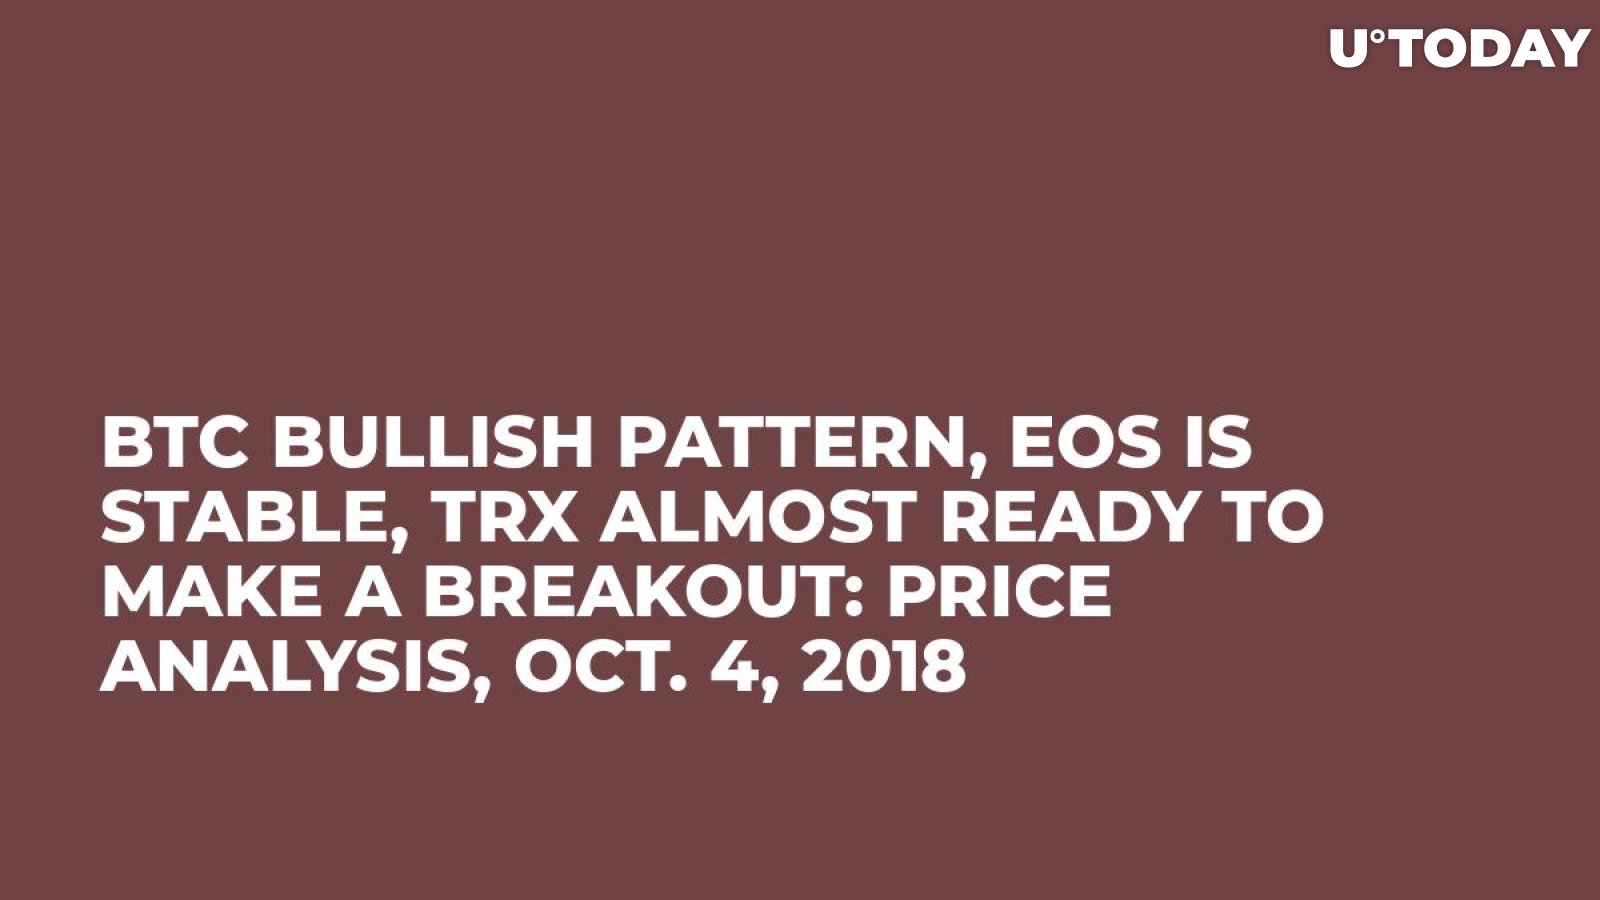 BTC Bullish Pattern, EOS Is Stable, TRX Almost Ready To Make a Breakout: Price Analysis, Oct. 4, 2018